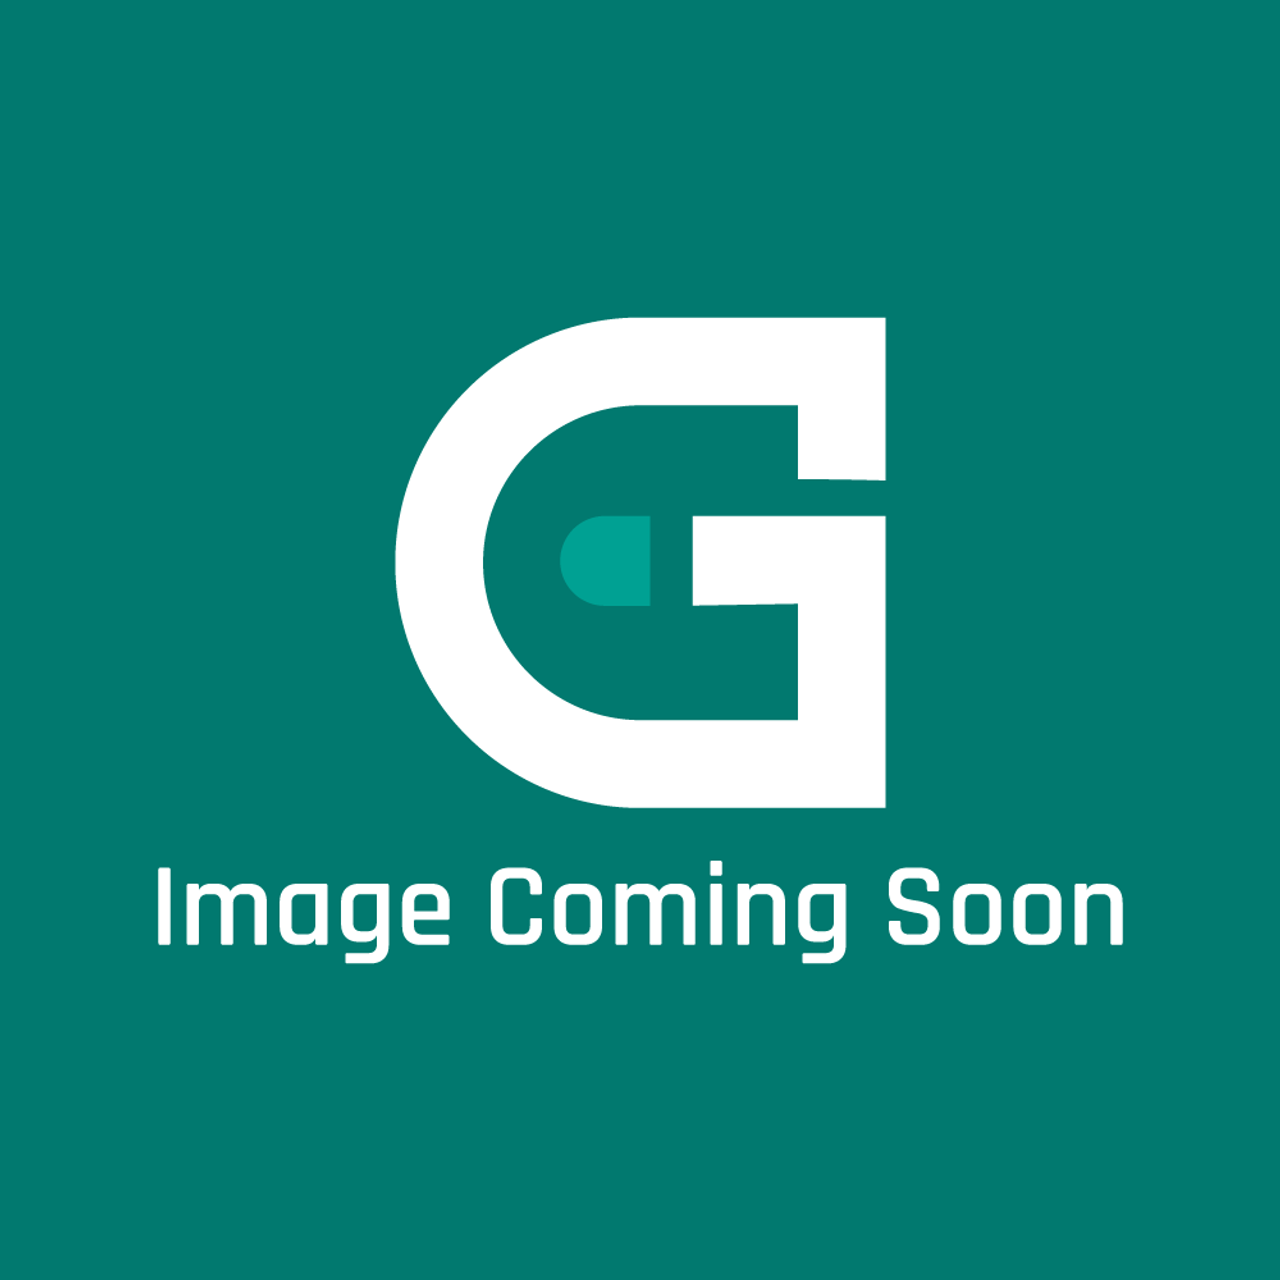 GE Appliances WR14X37793 - Air Tower - Image Coming Soon!